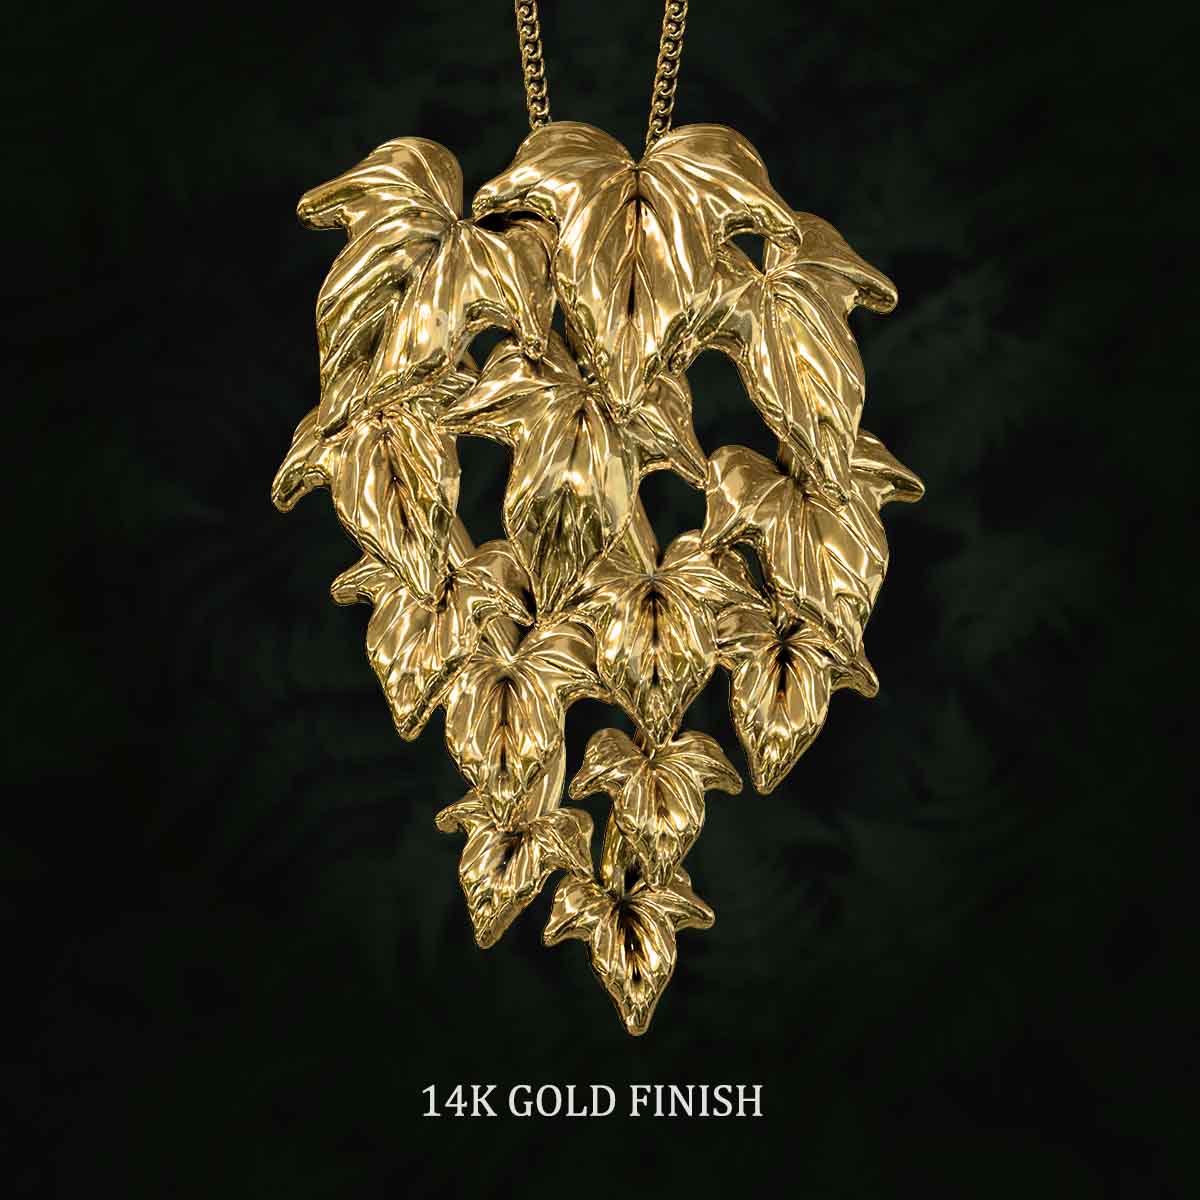 14k-Gold-Finish-Flowing-Vine-Medium-Pendant-Jewelry-For-Necklace